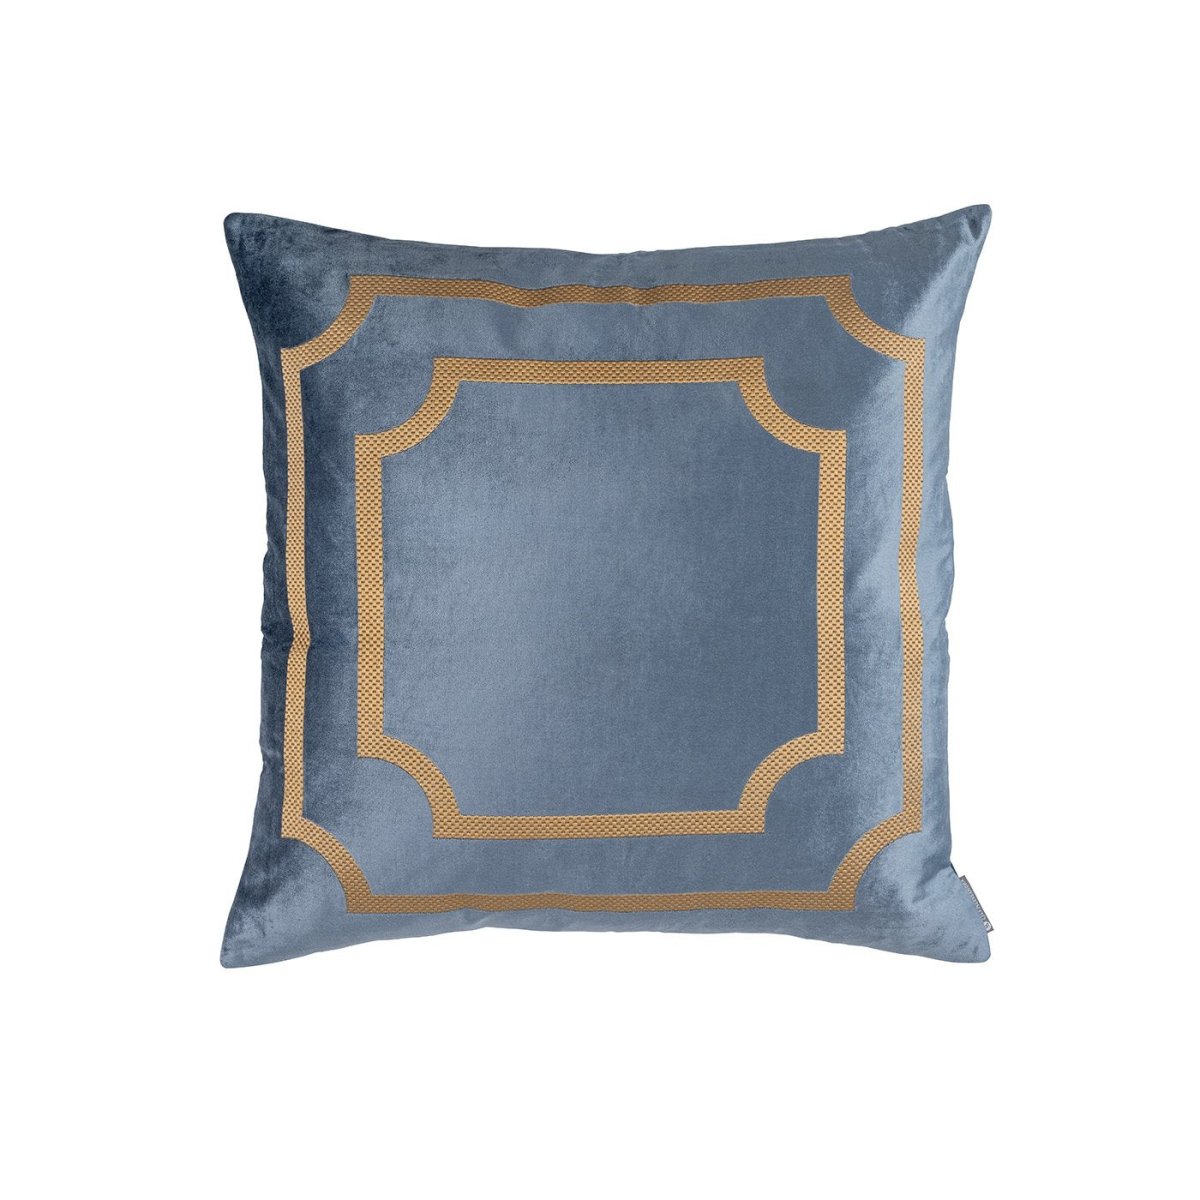 Soho Blue & Gold Antique Pillow by Lili Alessandra | Fig Linens 